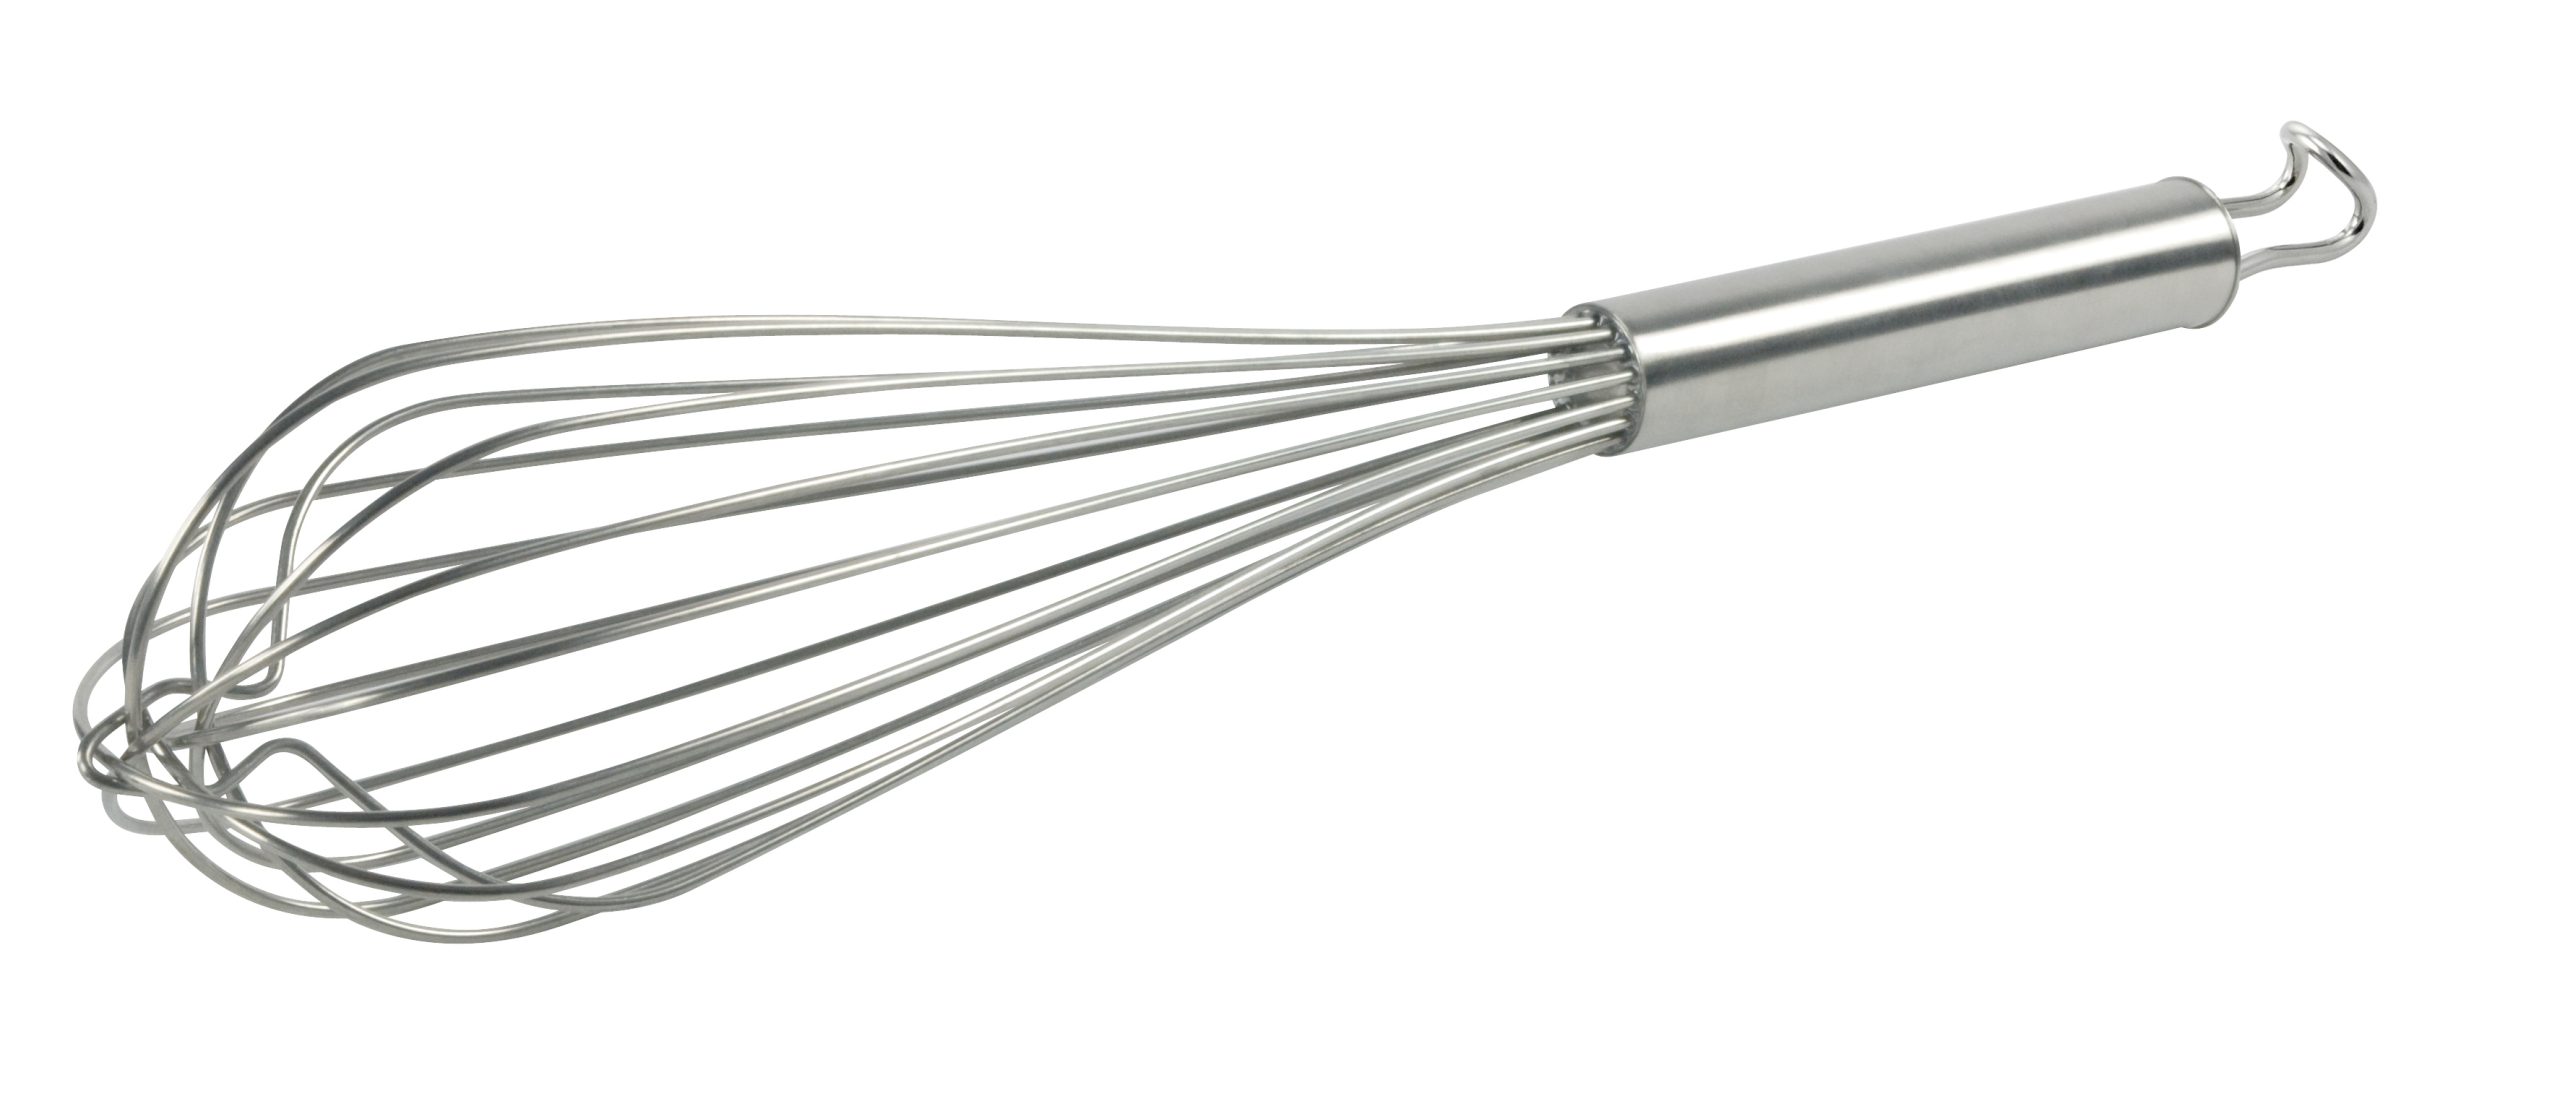 Professional Kitchen whisk 8 wires / 30CM - Stainless steel 18/10 ILSA Italy